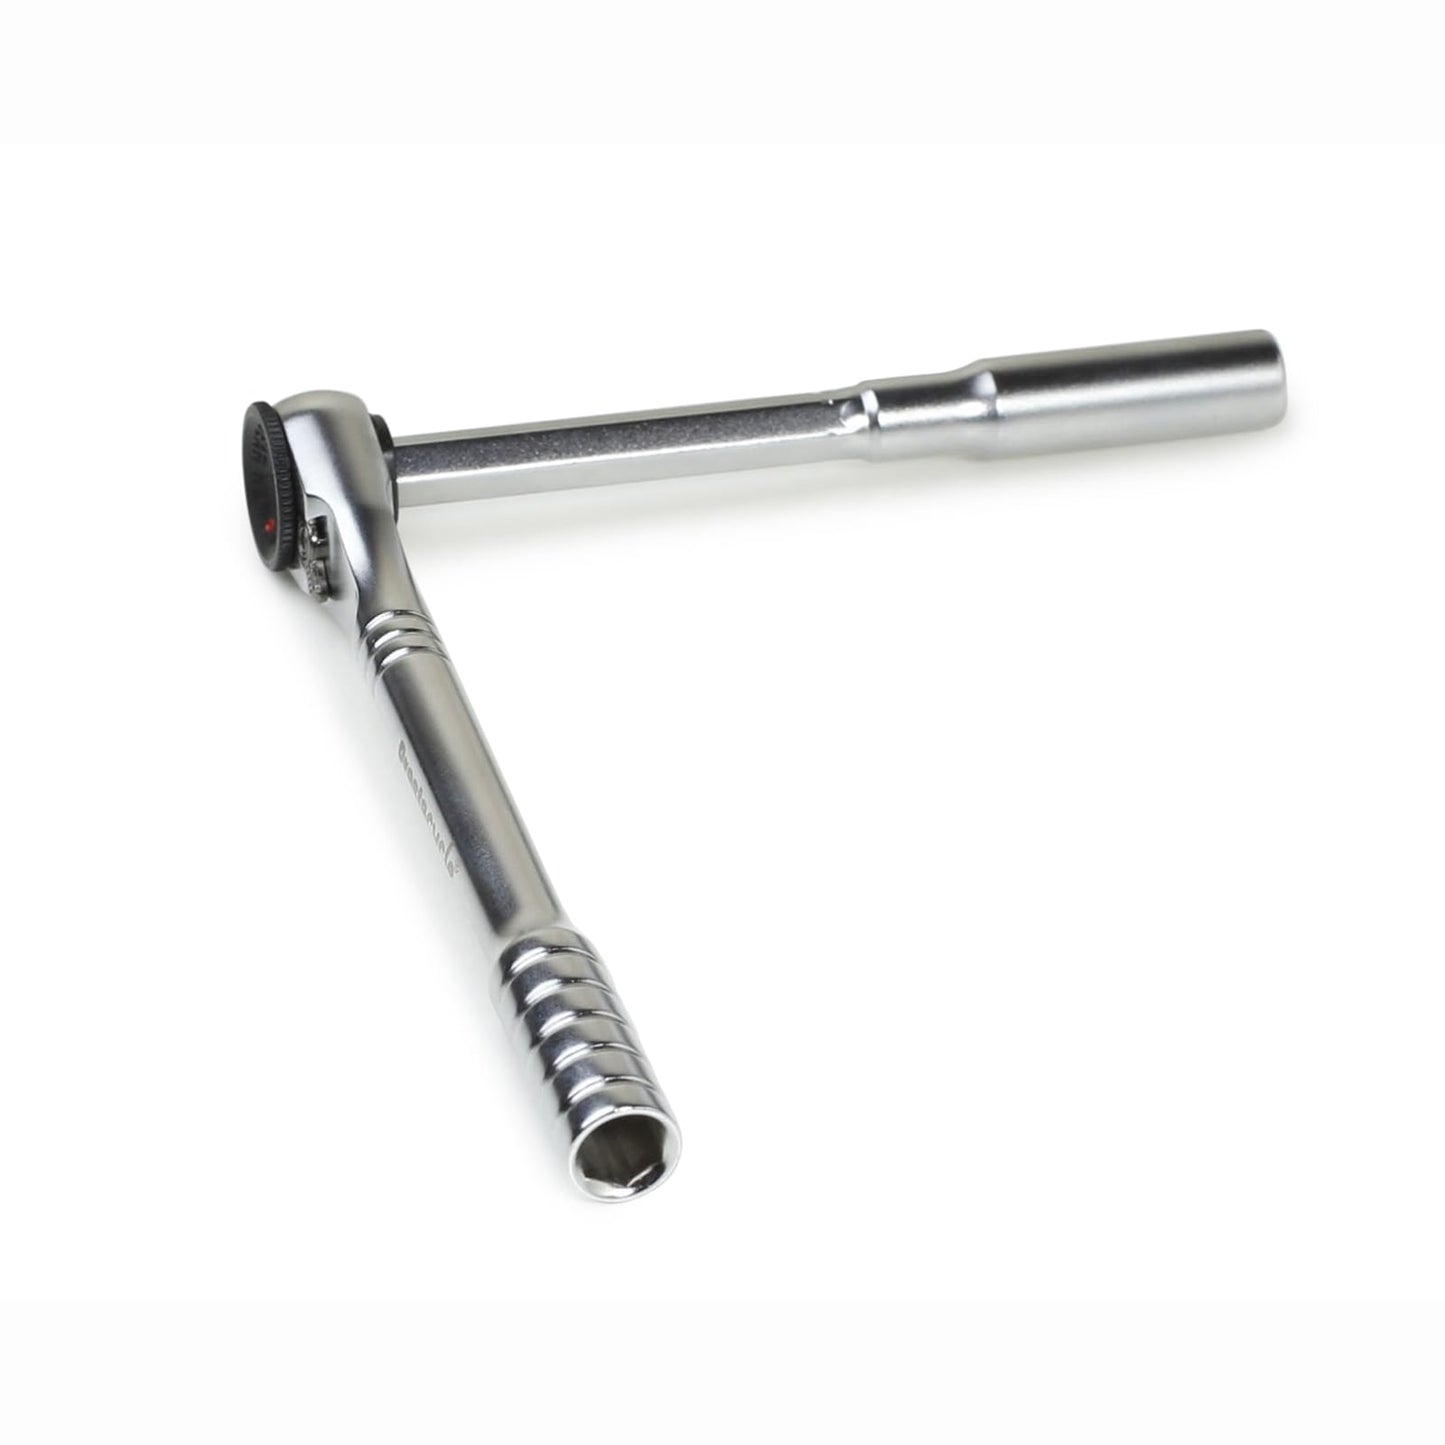 Prestacycle T-Handle Ratchet - 3 way Ratchet and T-Handle Tool Bundle (Ratchet and Extension only)